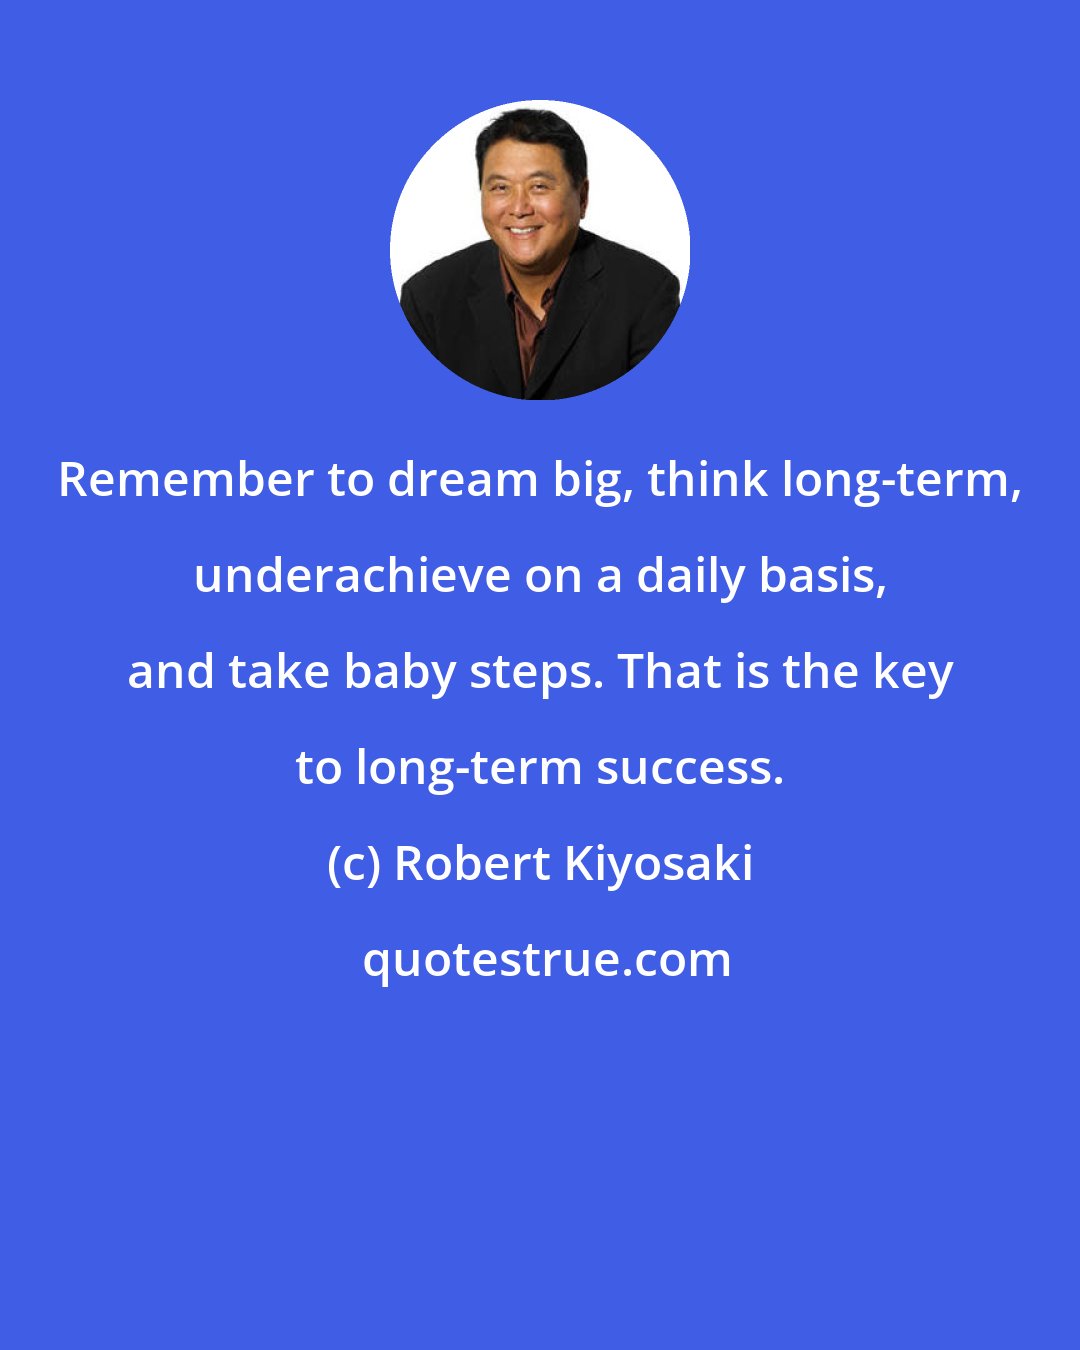 Robert Kiyosaki: Remember to dream big, think long-term, underachieve on a daily basis, and take baby steps. That is the key to long-term success.